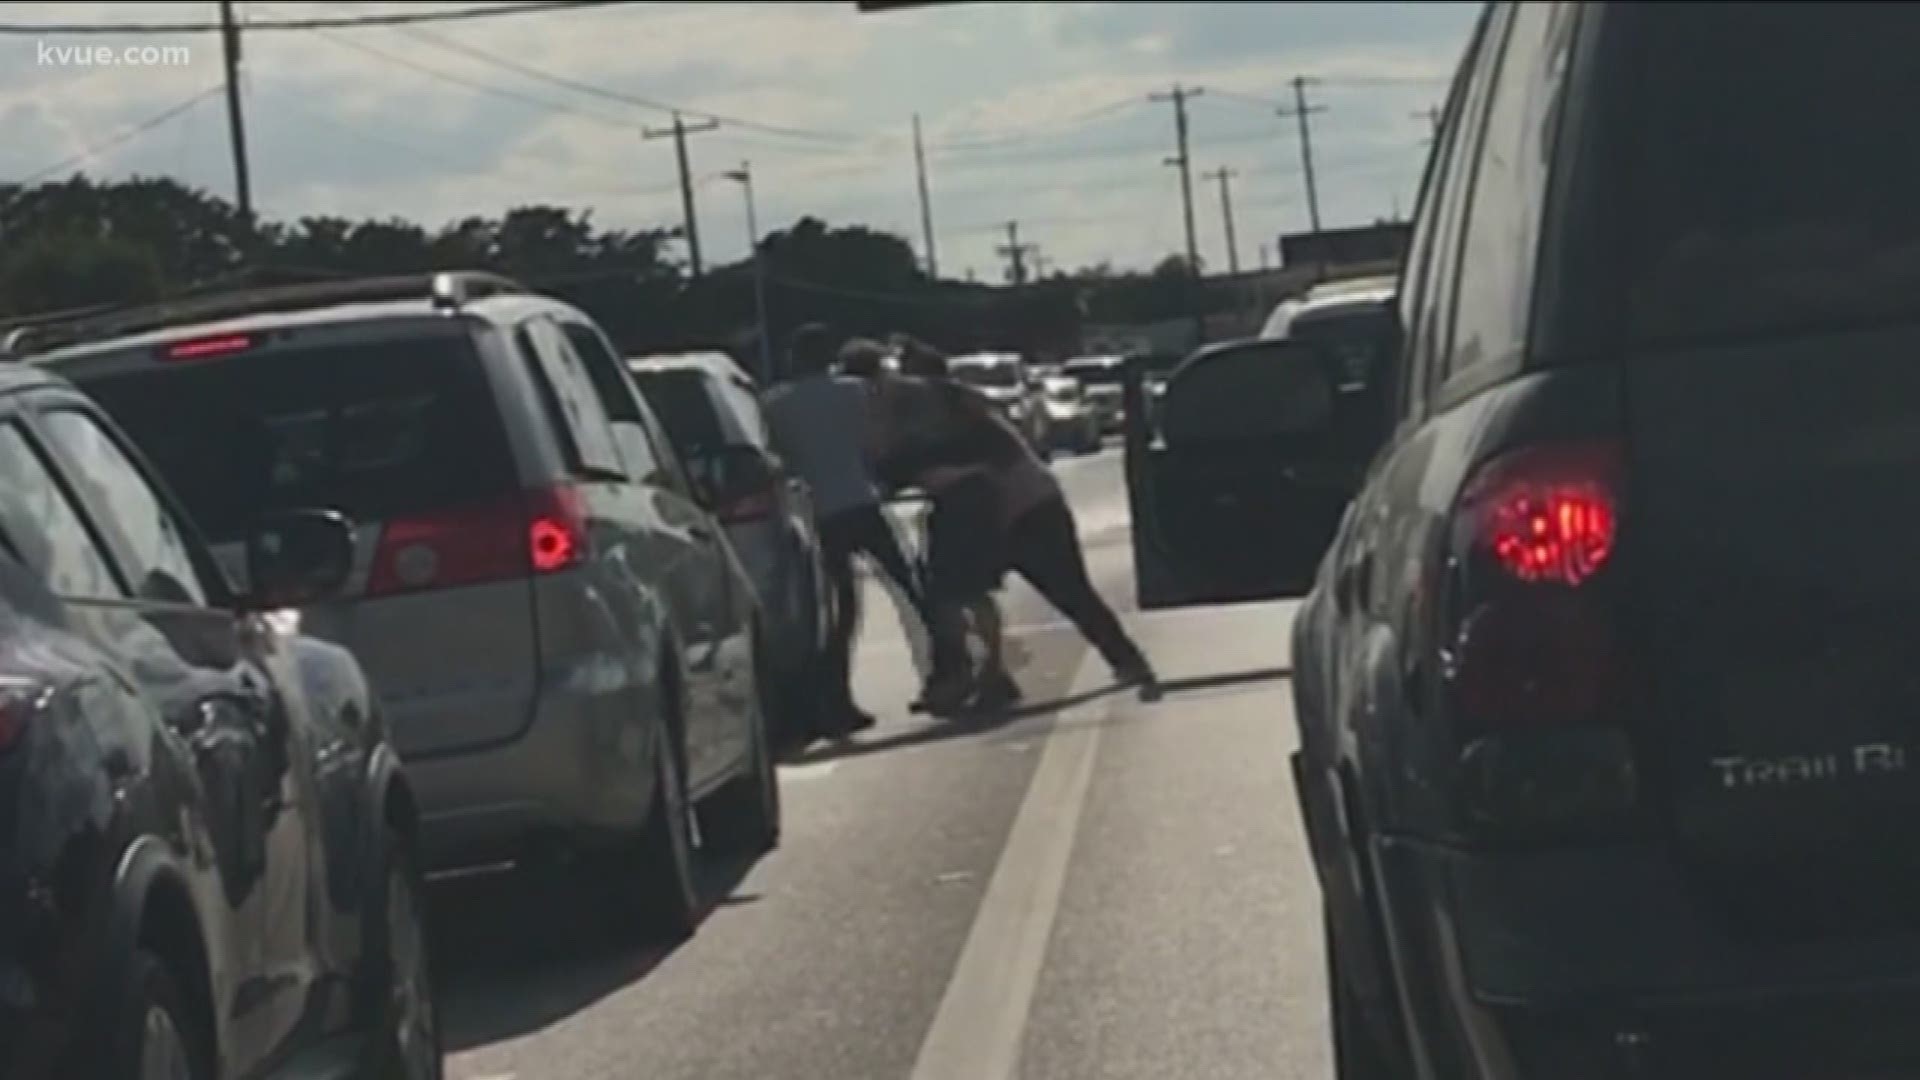 Shocking video has emerged of a fight between a group of men on a busy road in Round Rock on Tuesday.